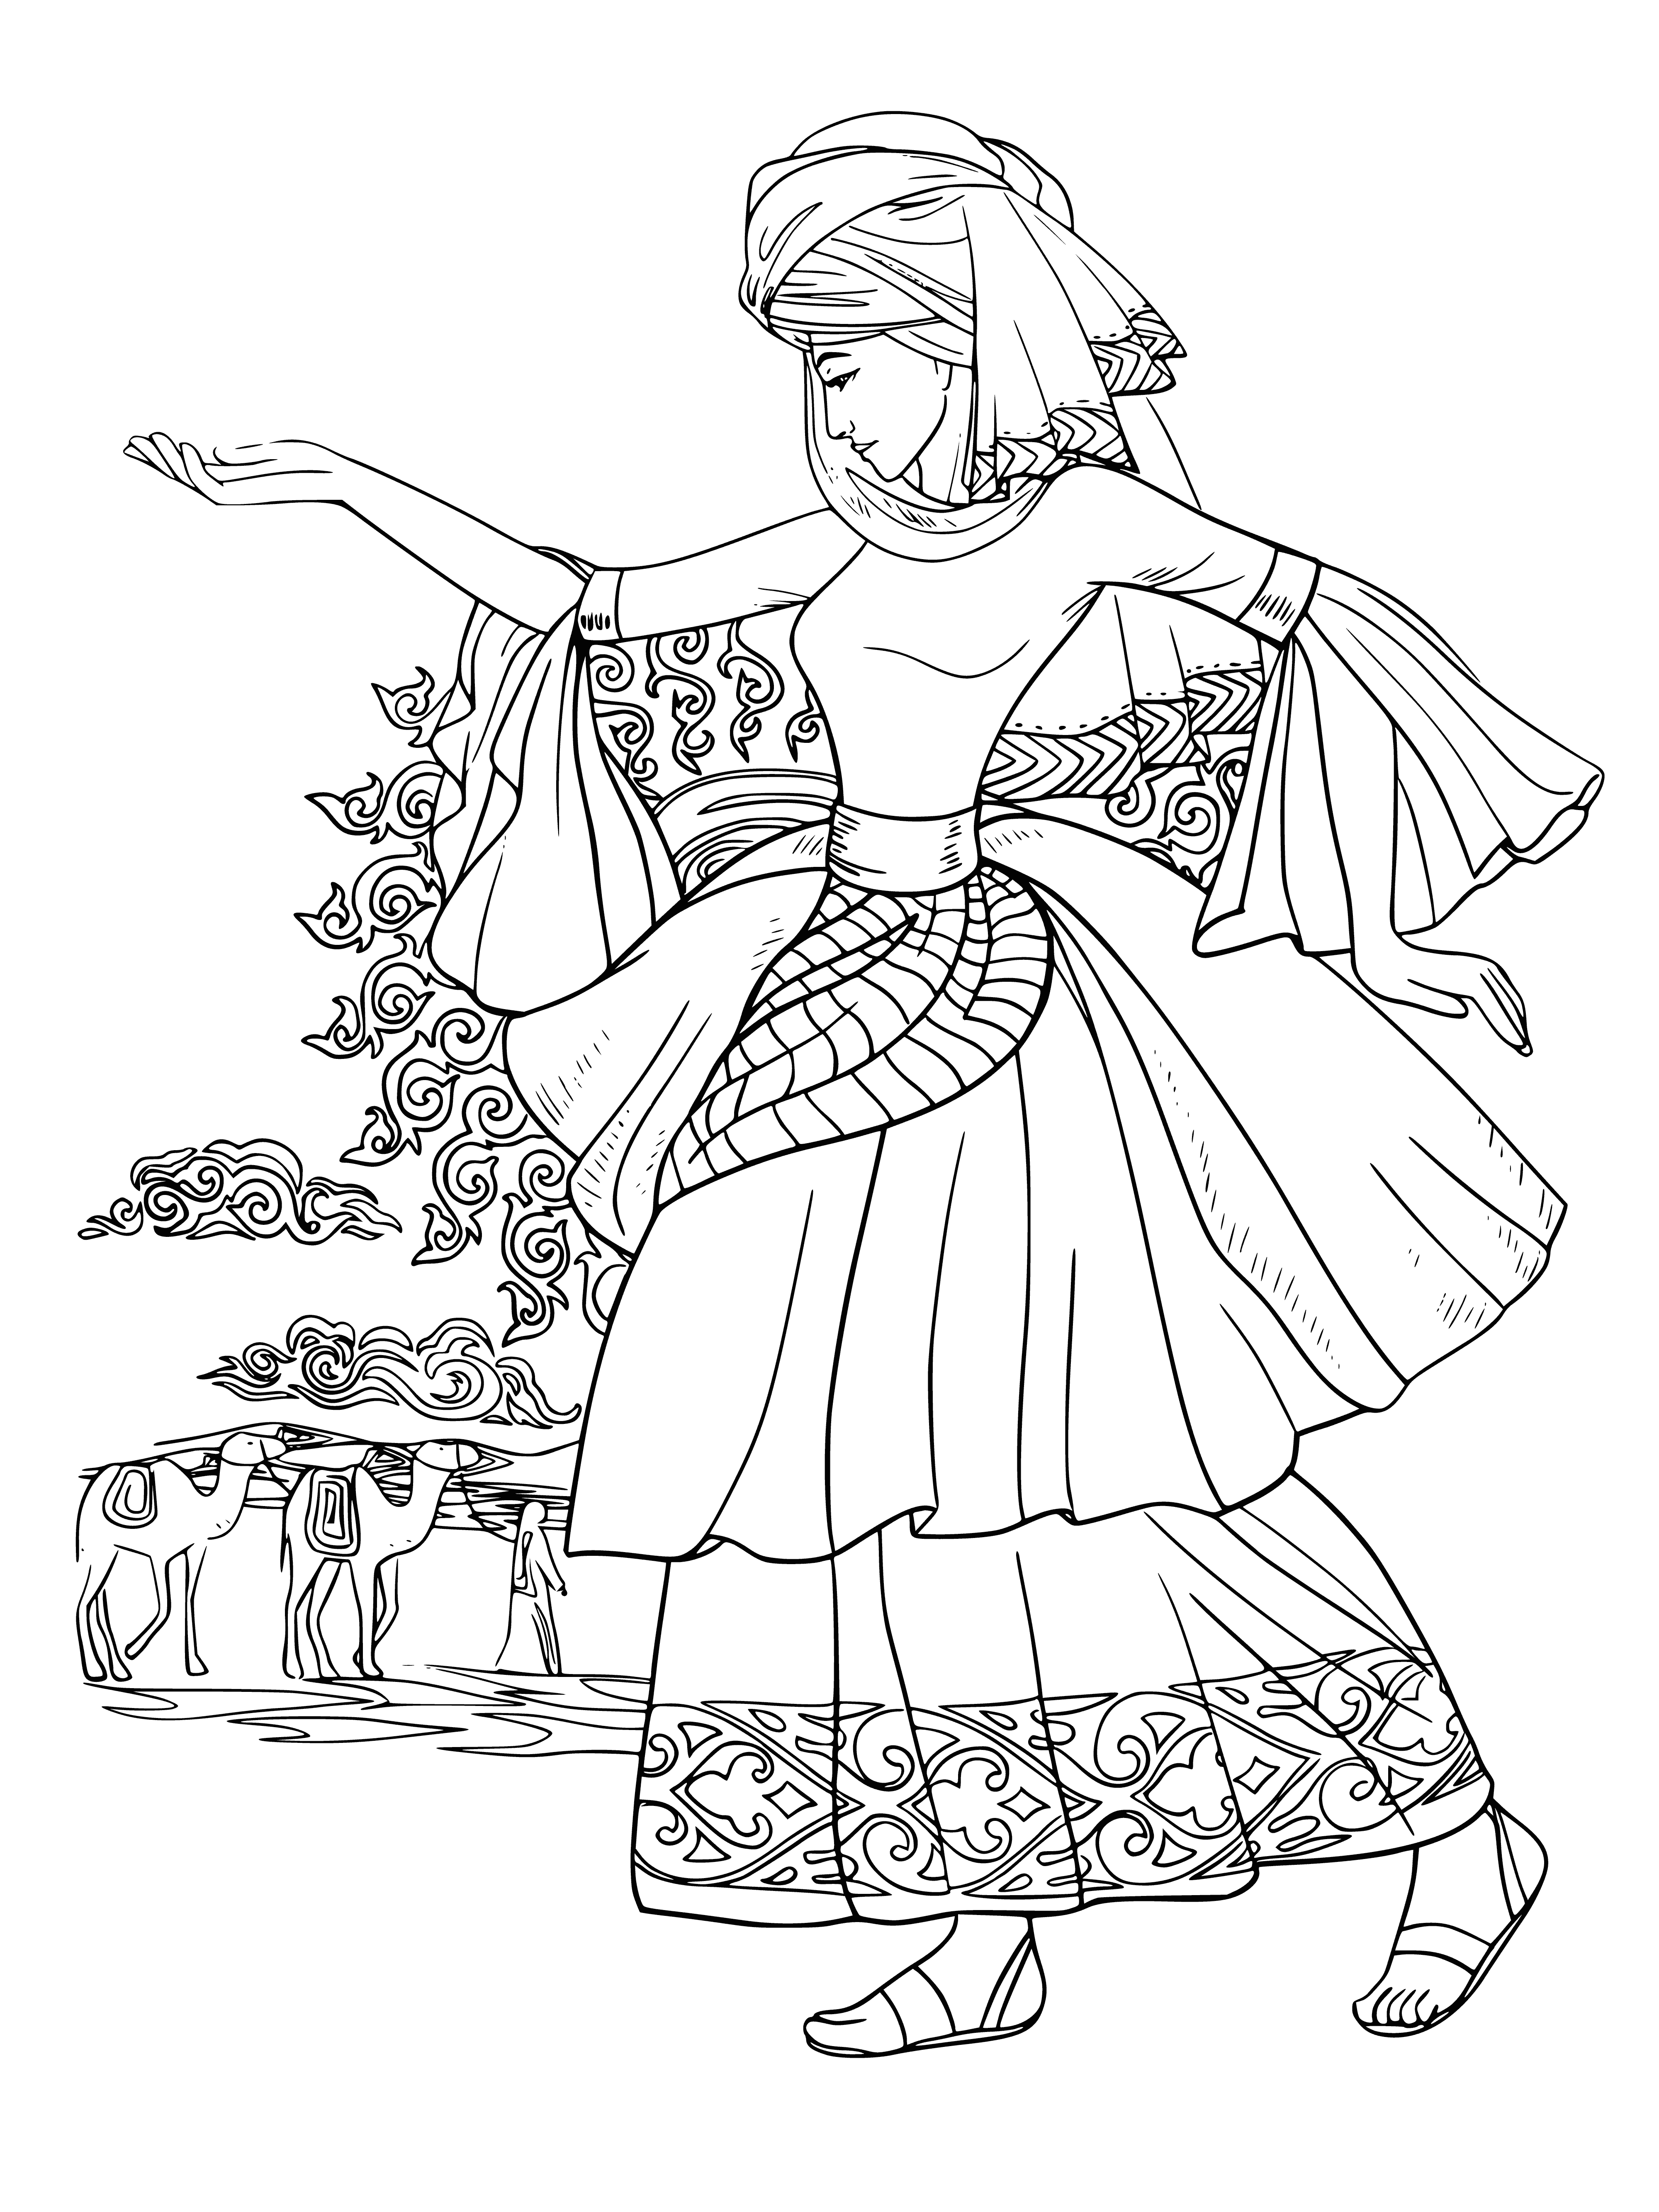 coloring page: Young women dance in a colorful circle, linking arms in a mesmerizing trance. Richly pigmented skin & colorful dress & headscarves in deep-blue background w/ gold & white patterns.